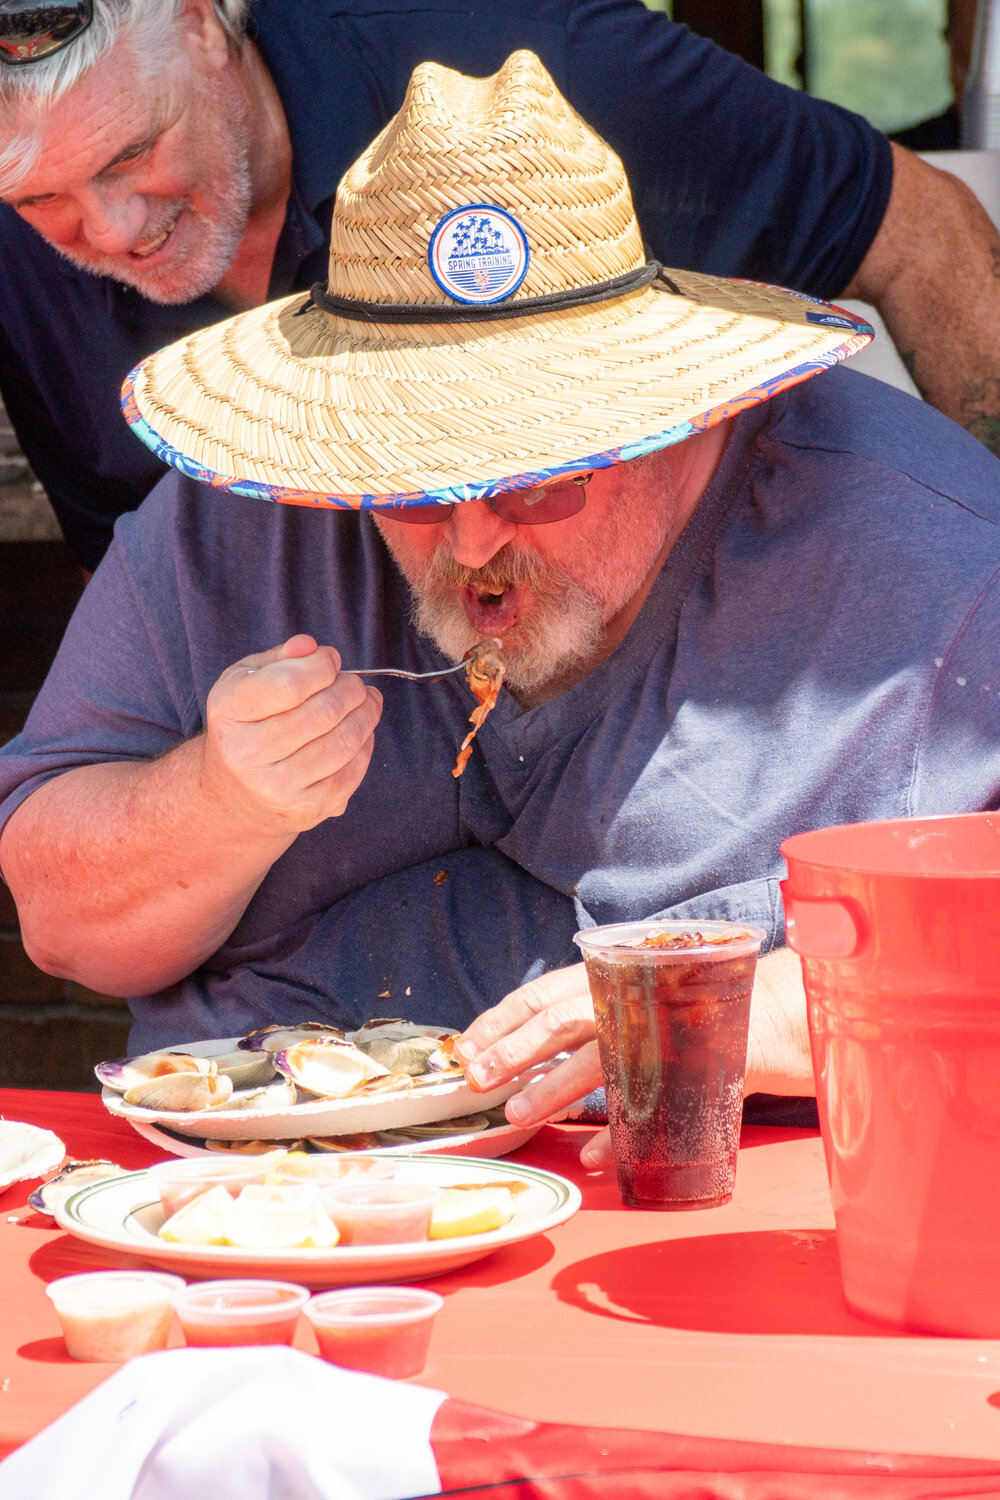 Island Park resident Pete Adams downed lots of clams at Peter’s Clam Bar as part of the Beyond the Badge fundraiser this year.